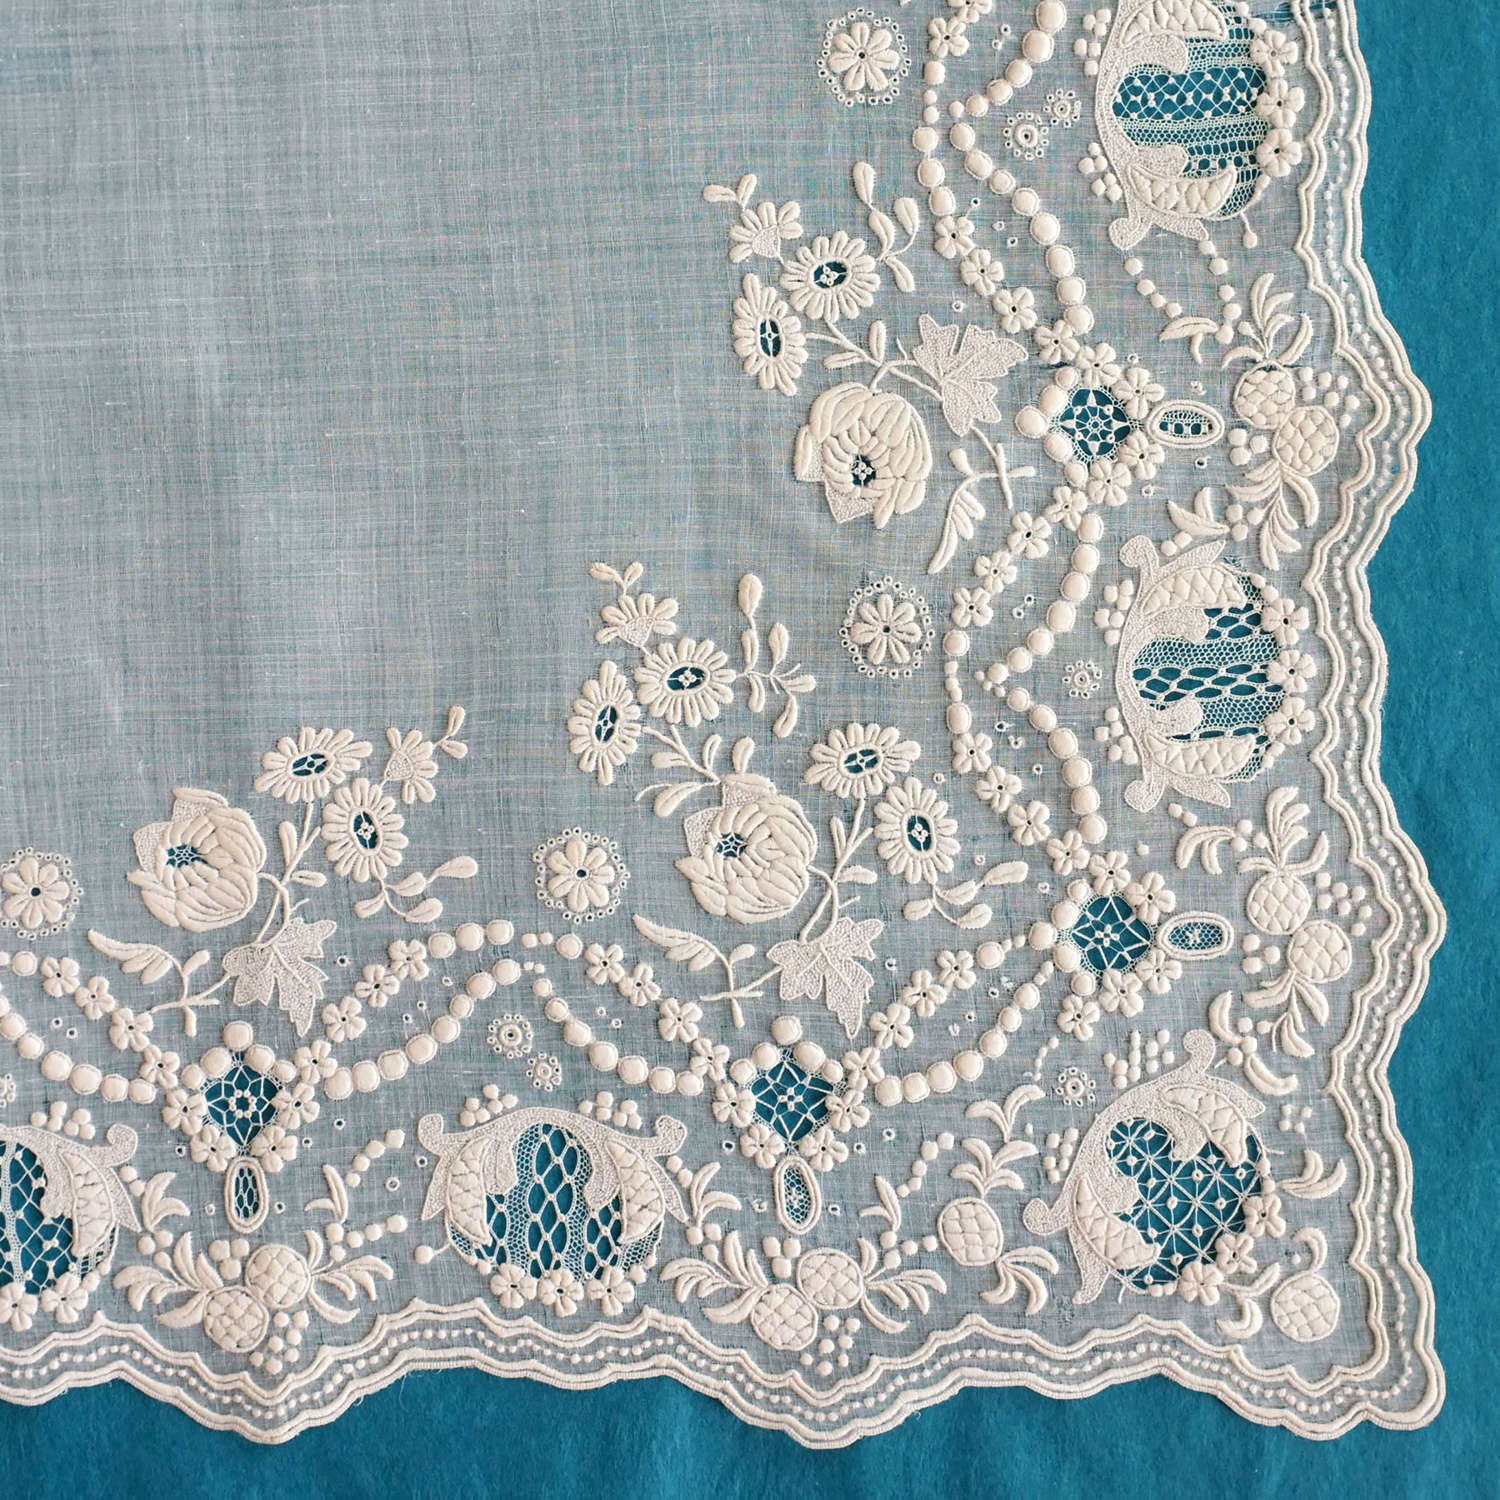 Antique Large Whitework Embroidered Handkerchief